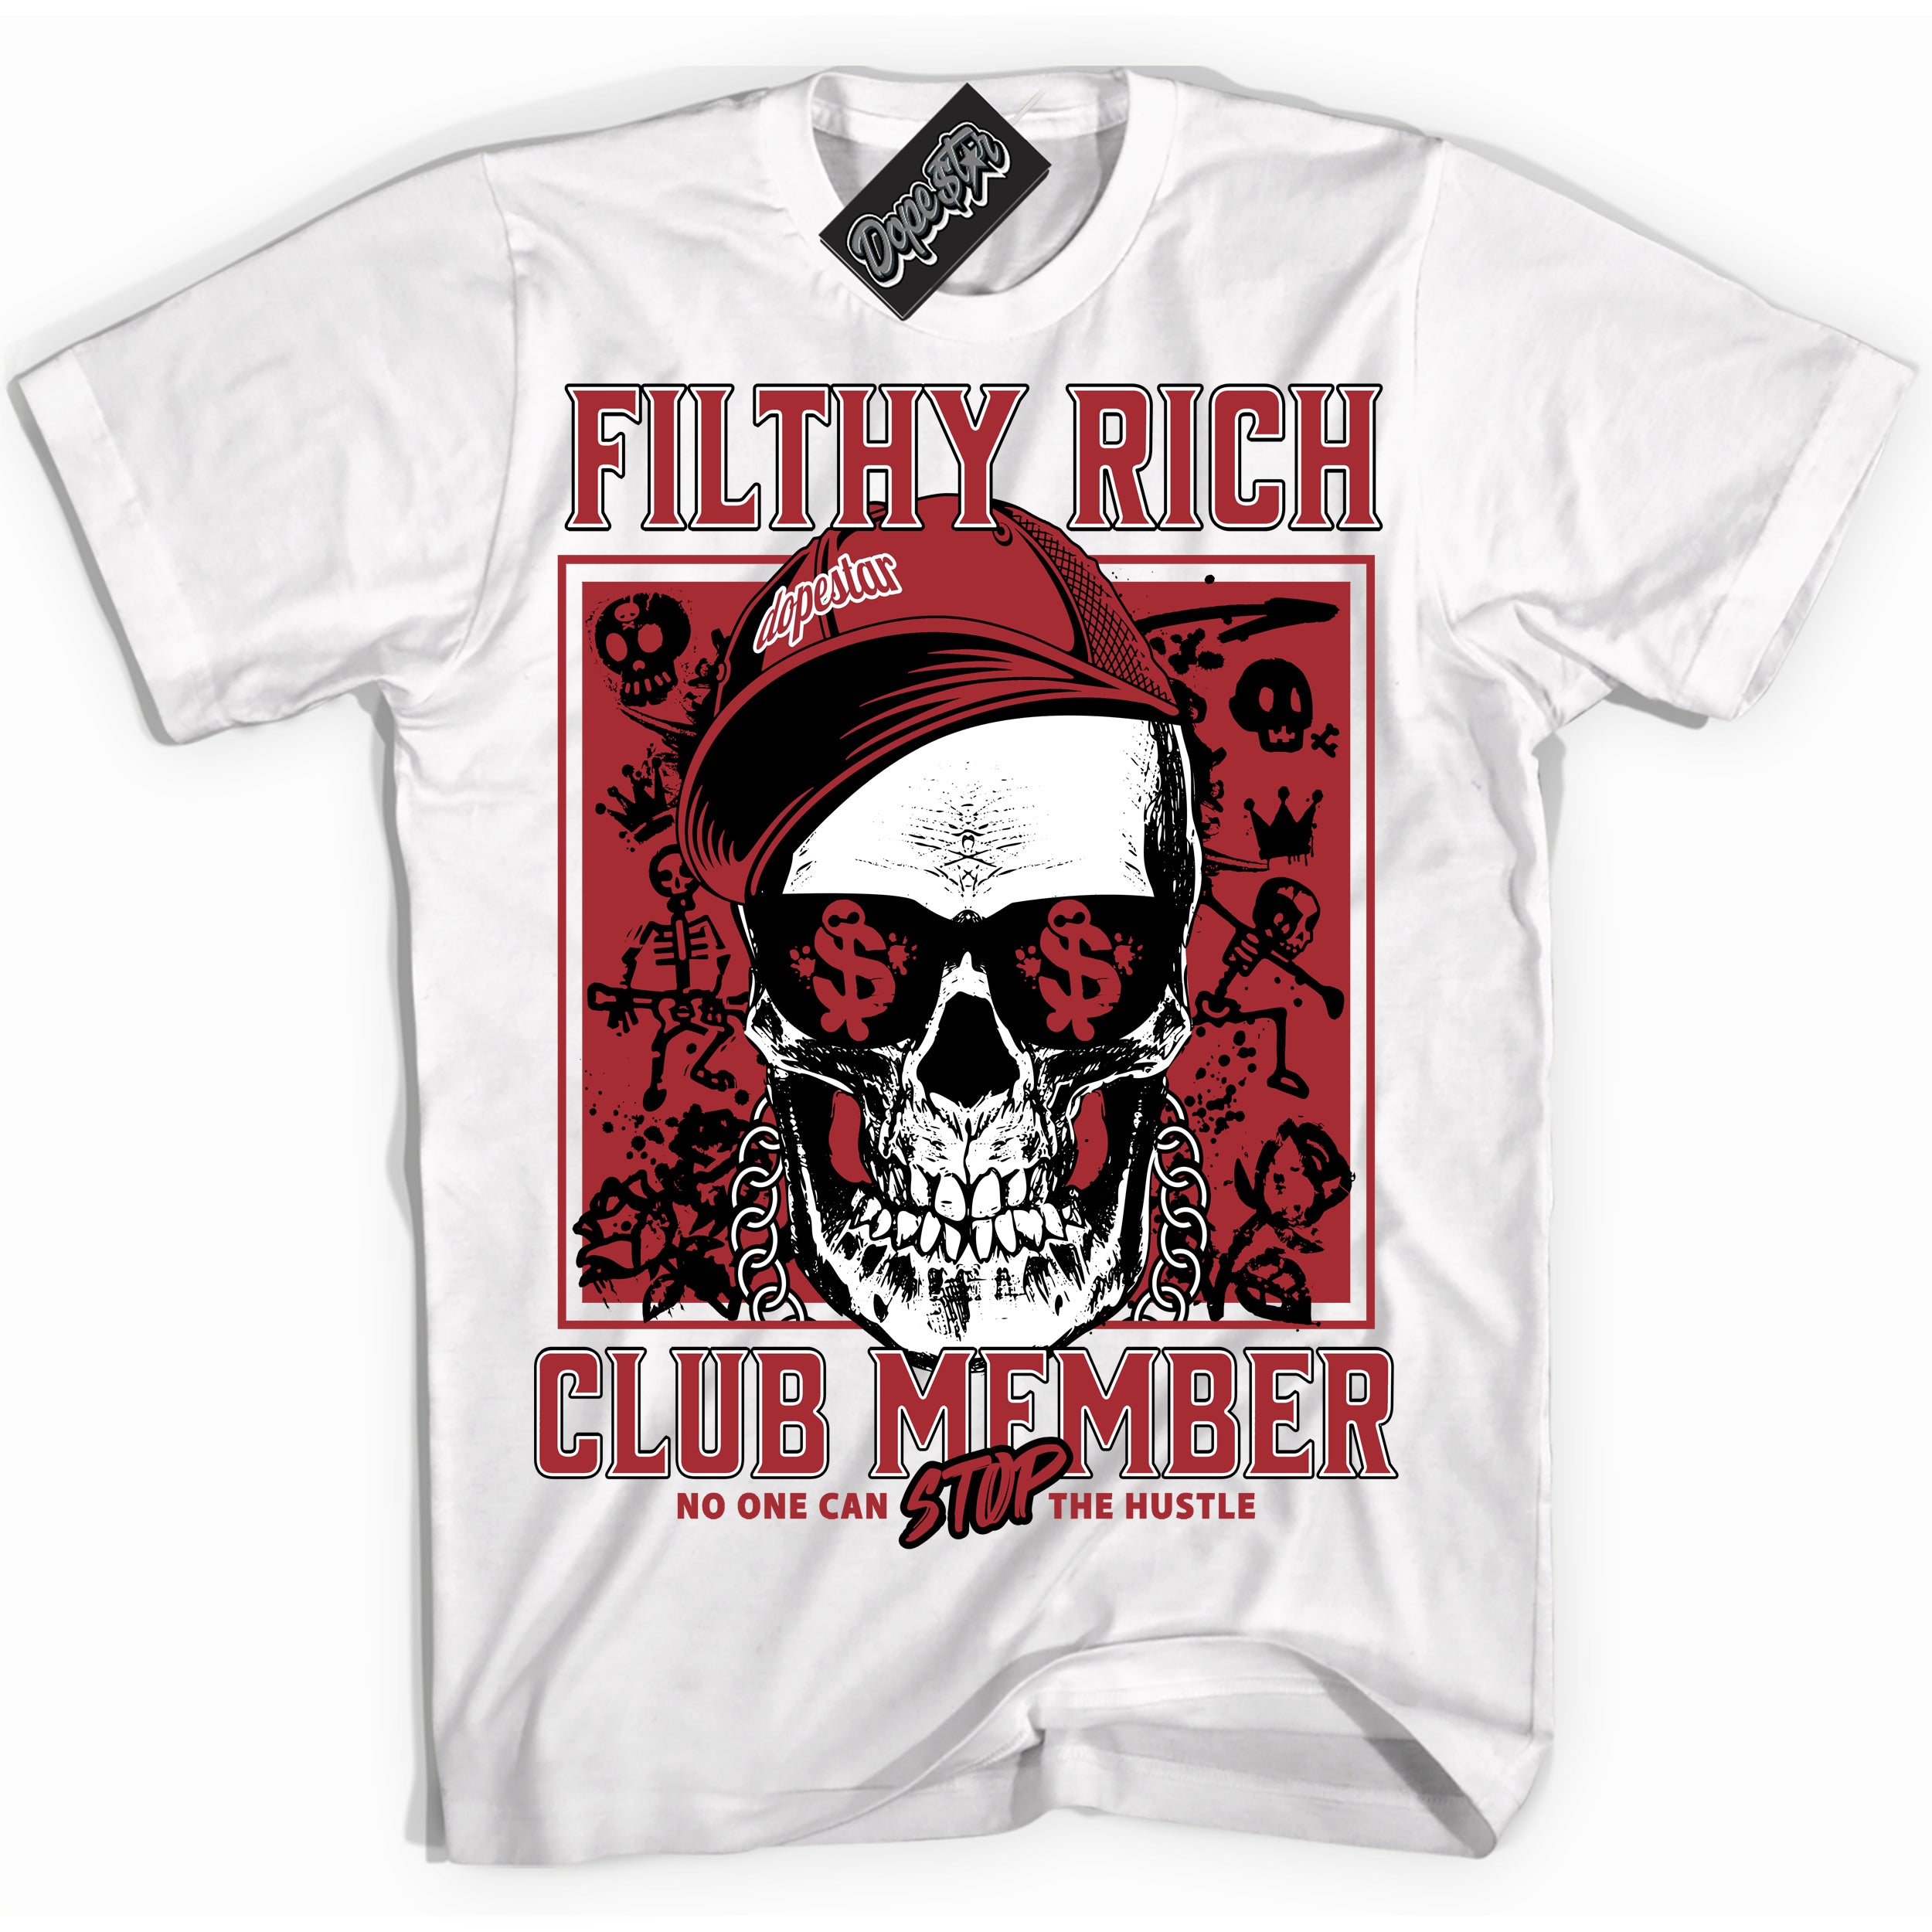 Cool White Shirt with “ Filthy Rich” design that perfectly matches Pro J Pack Chicago Sneakers.